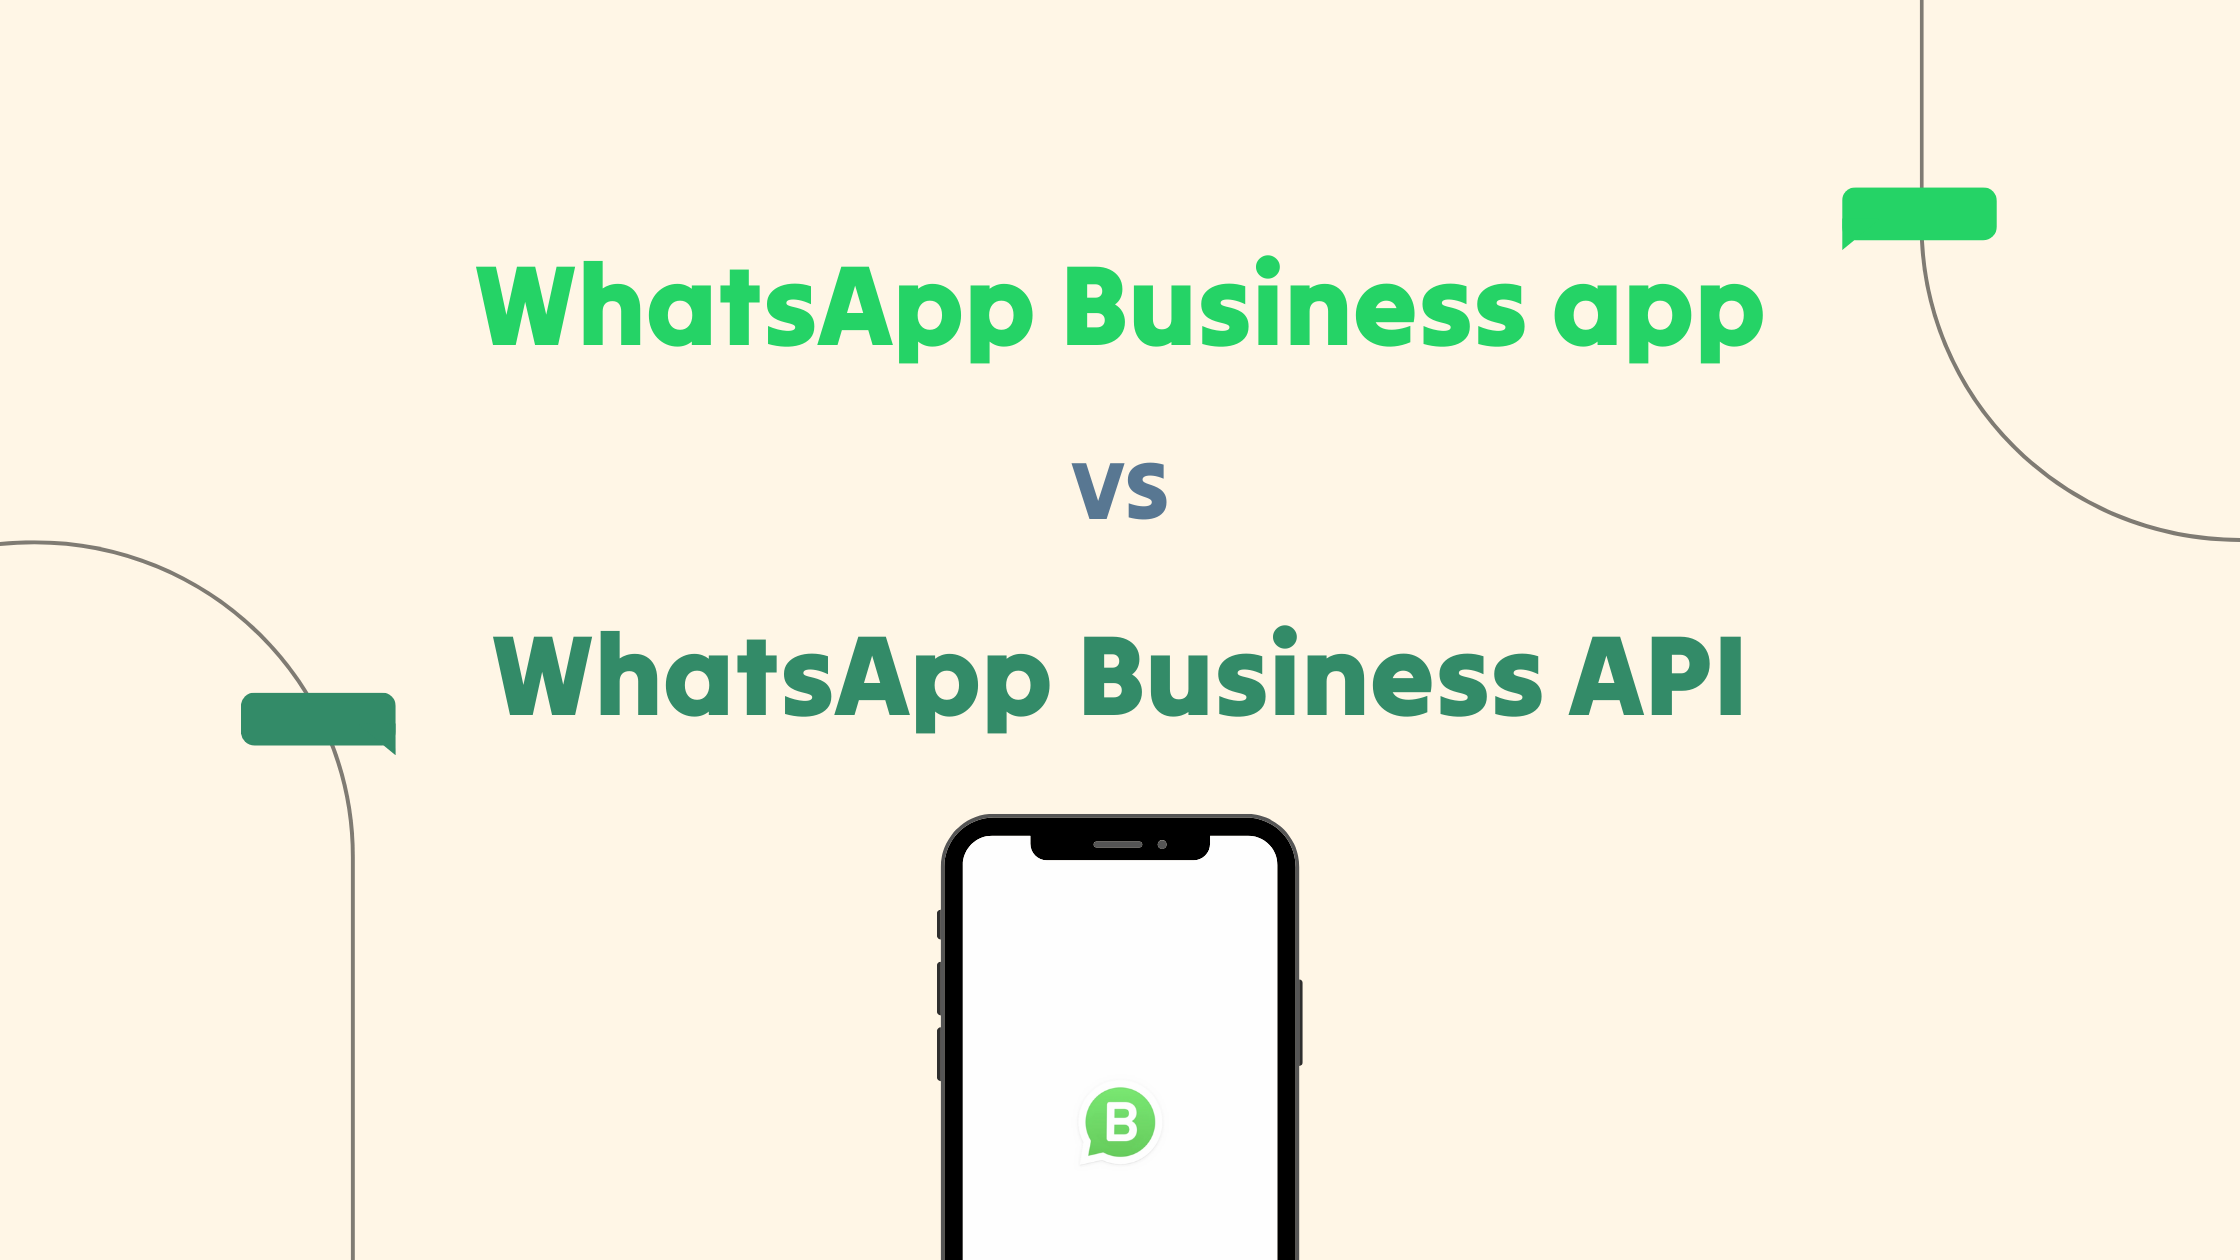 Image of a phone with the WhatsApp Business logo on the screen.